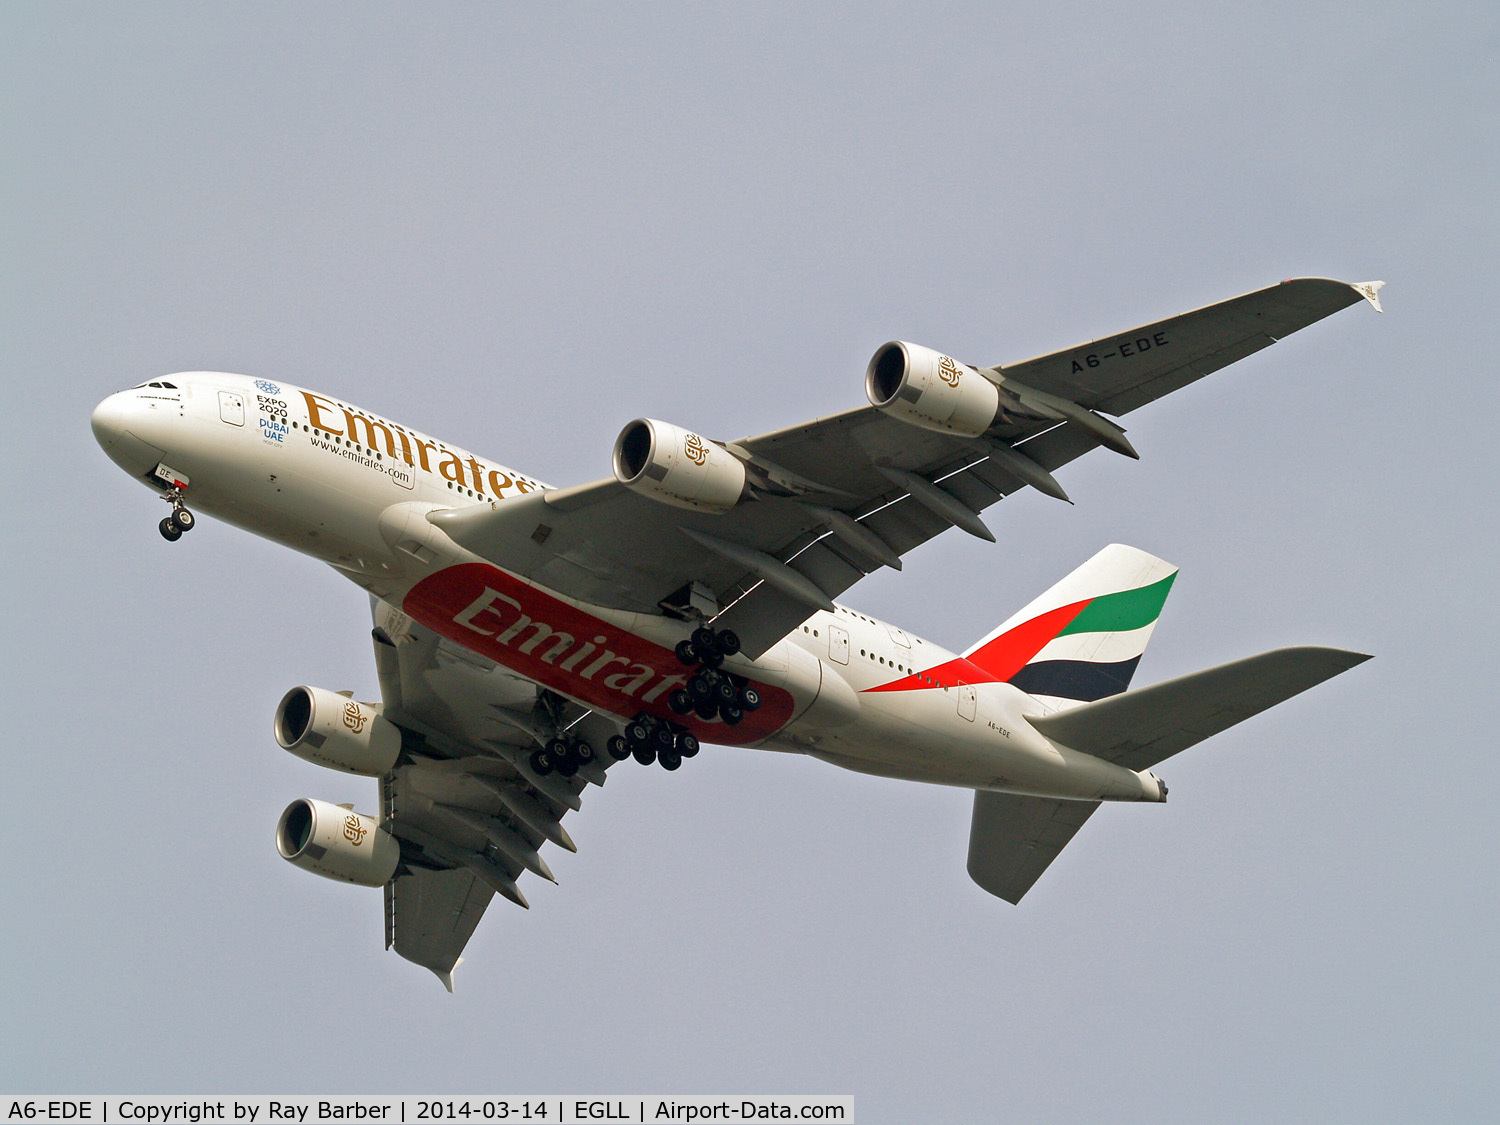 A6-EDE, 2008 Airbus A380-861 C/N 017, Airbus A380-861 [017] (Emirates Airlines) Home~G 14/03/2014. On approach 27R. Expo 2020 titles on nose area.